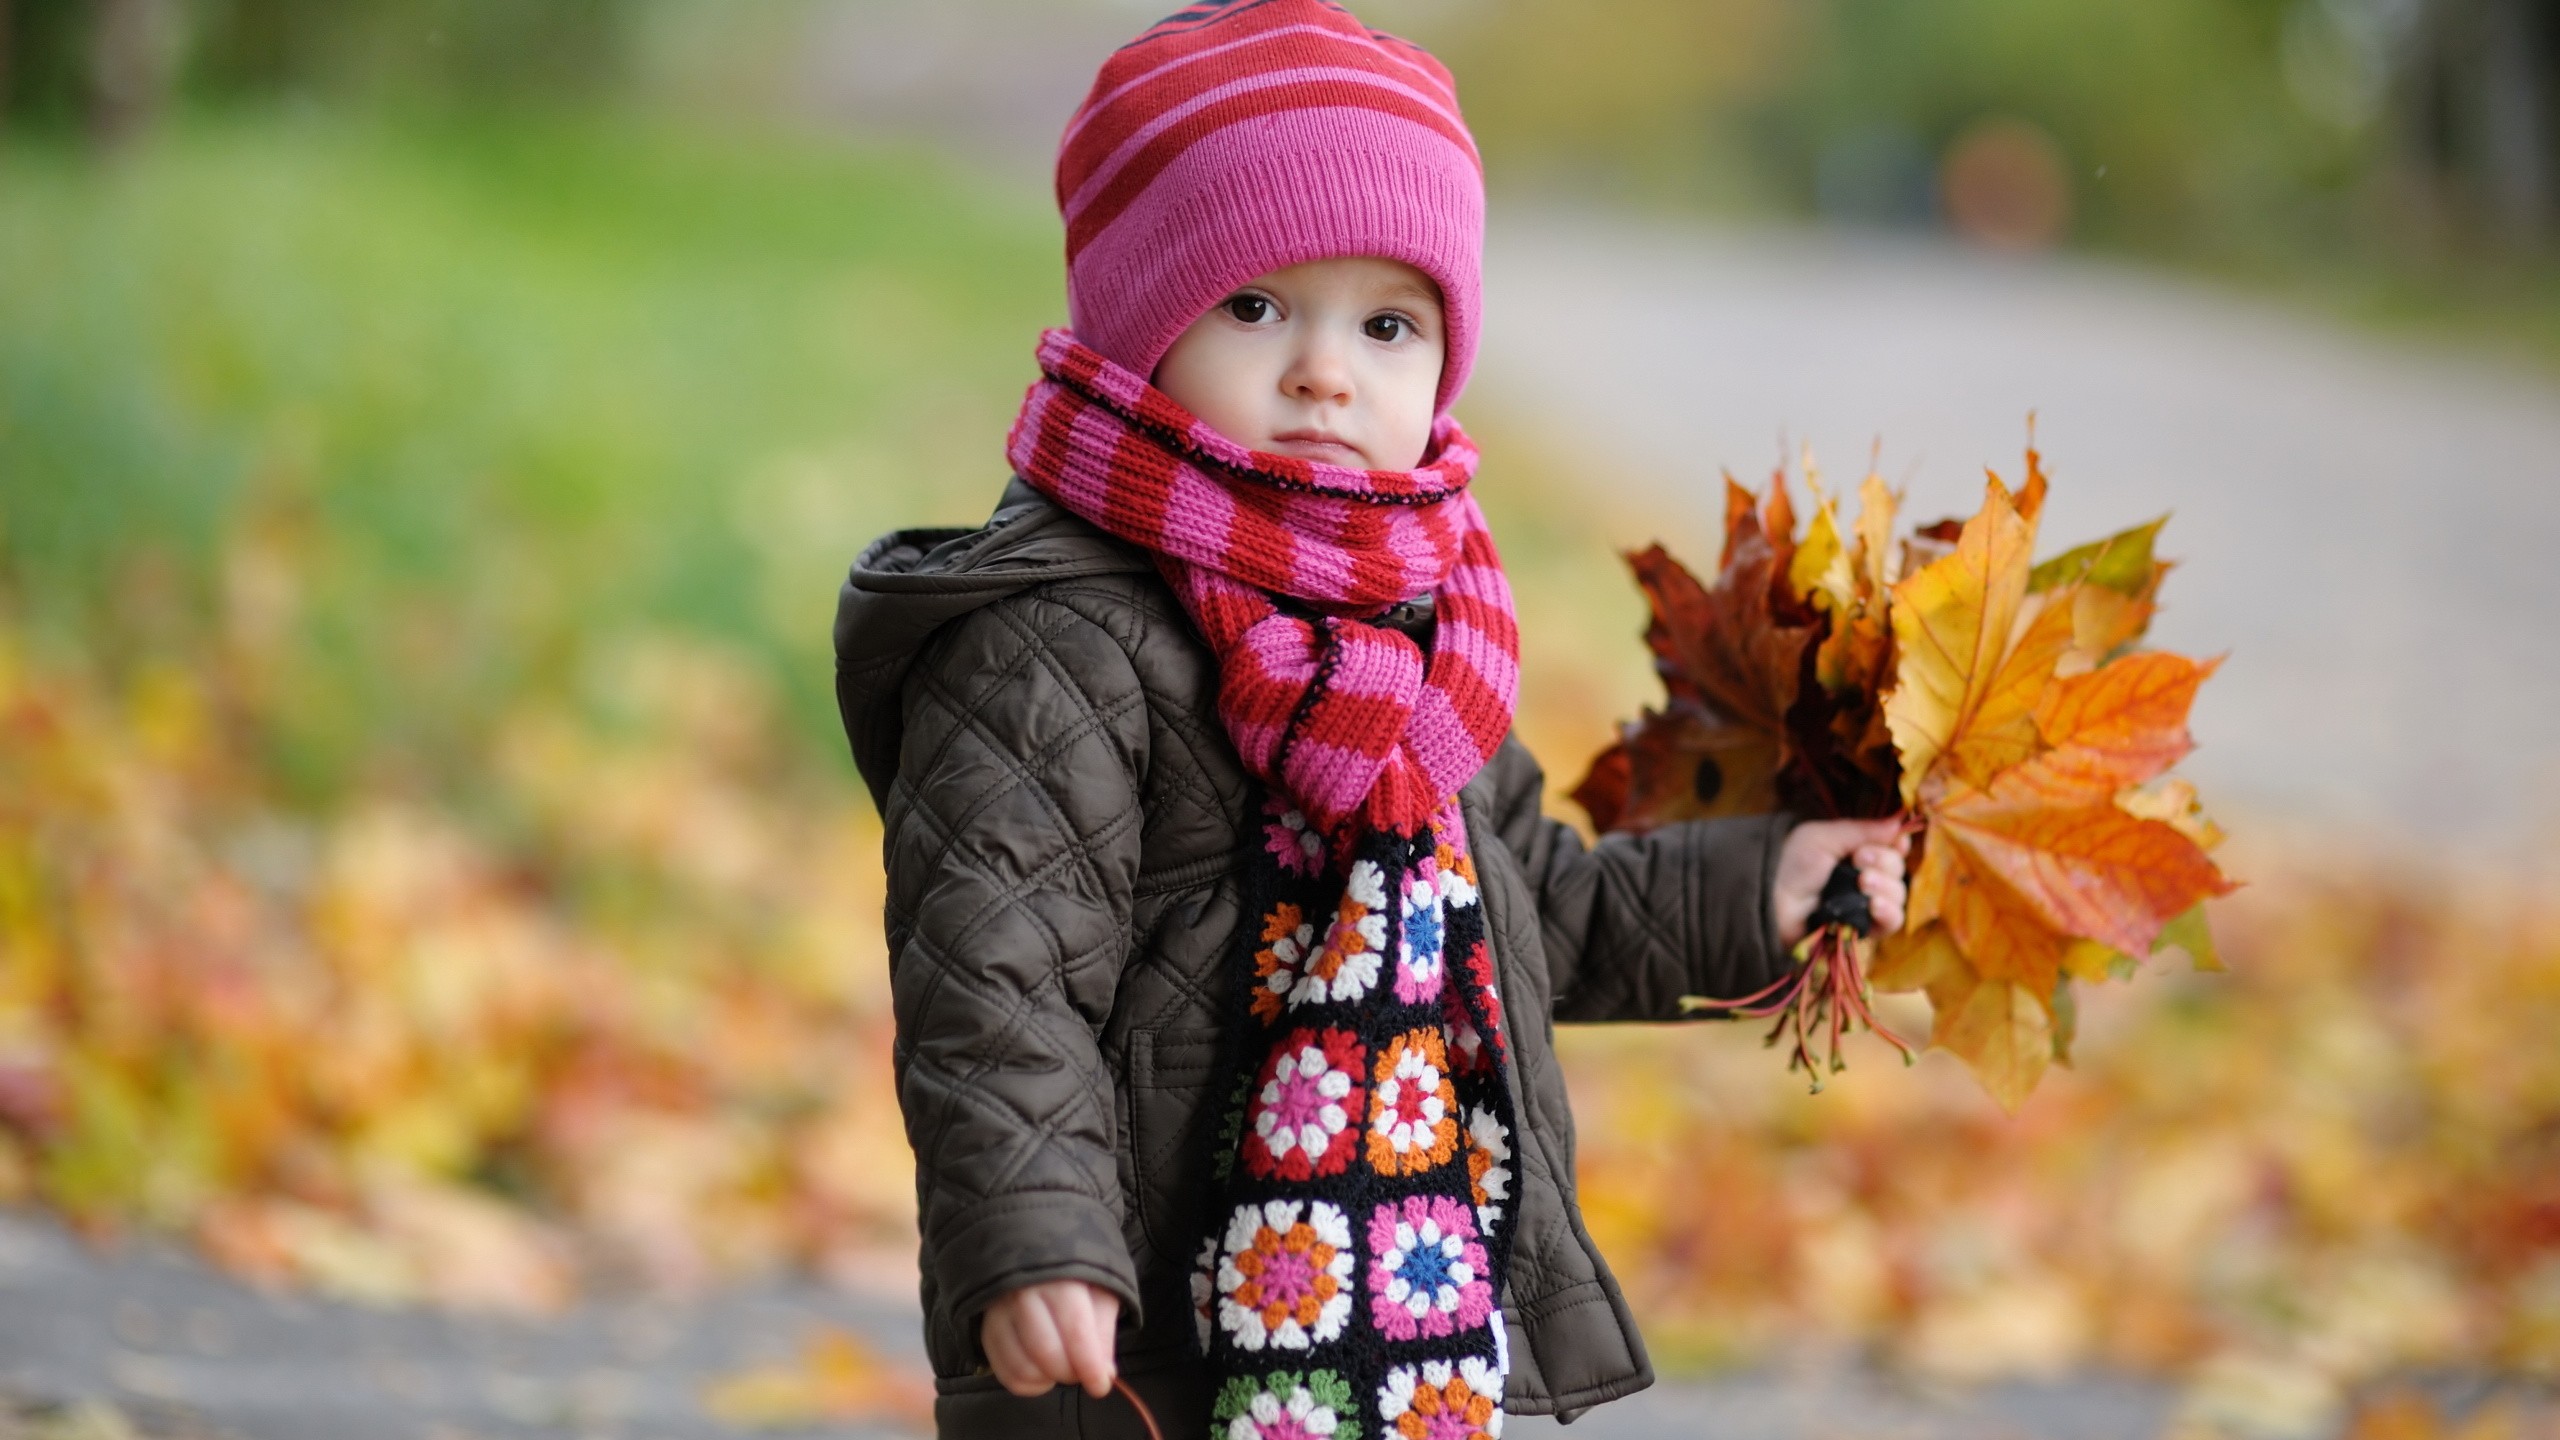 People 2560x1440 leaves outdoors children